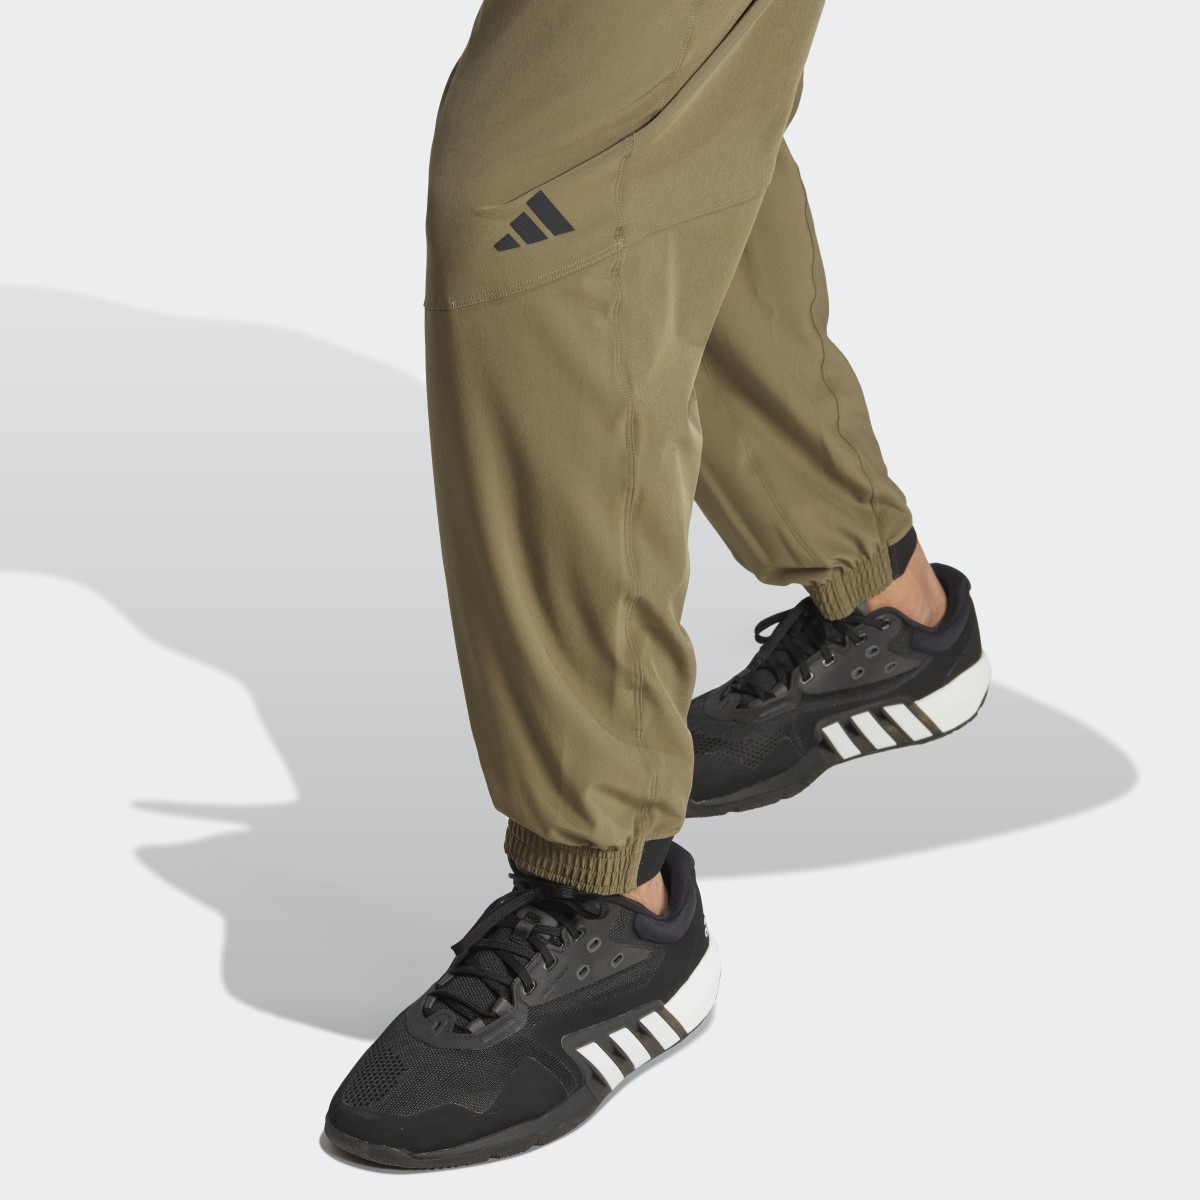 Adidas Designed for Training Pro Series Strength Pants. 6